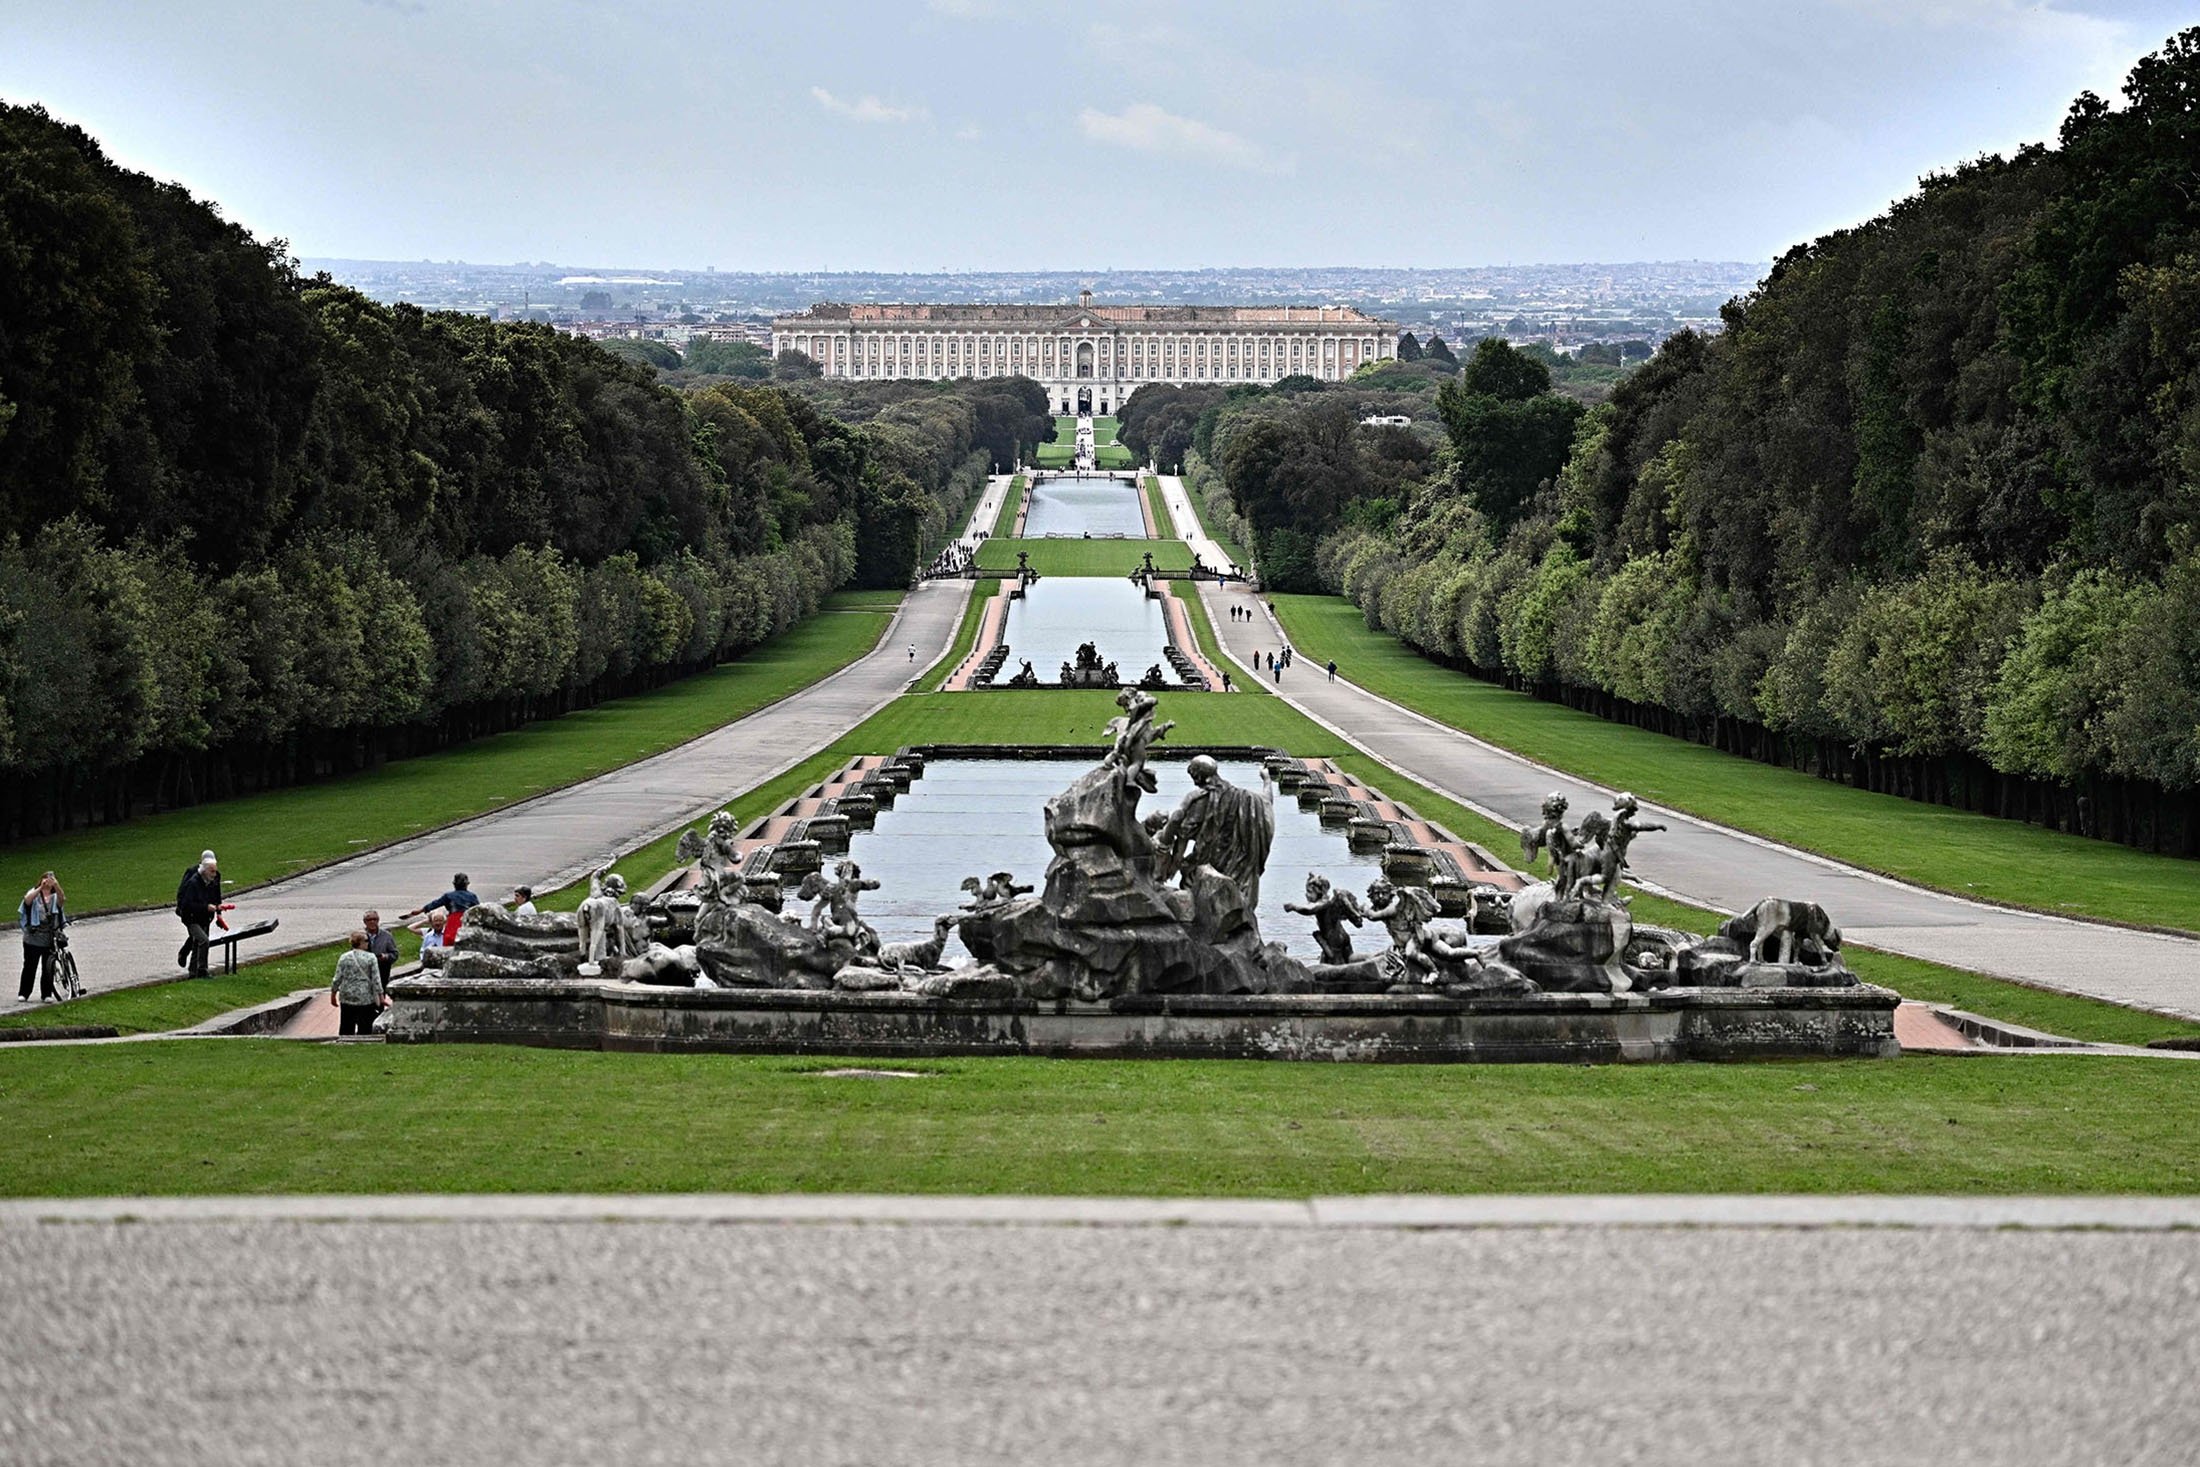 The Royal Palace of Caserta, the residence of the Bourbon dynasty in Caserta, near Naples, Italy, May 12, 2023. (AFP Photo)